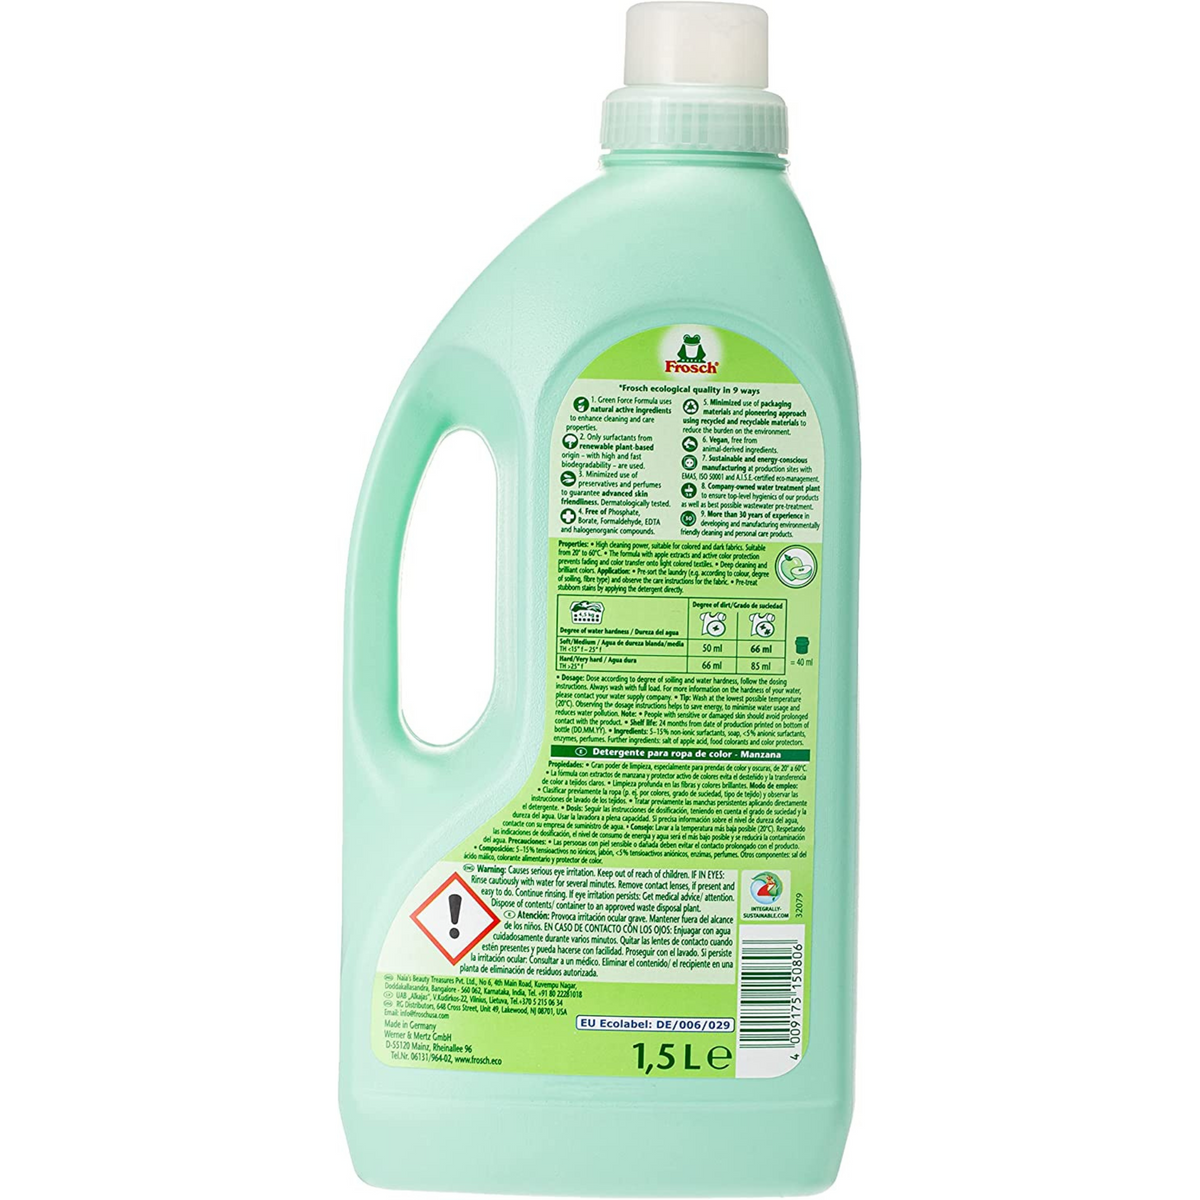 Frosch Apple Scented Color Laundry Detergent (1.5 L) #10085900